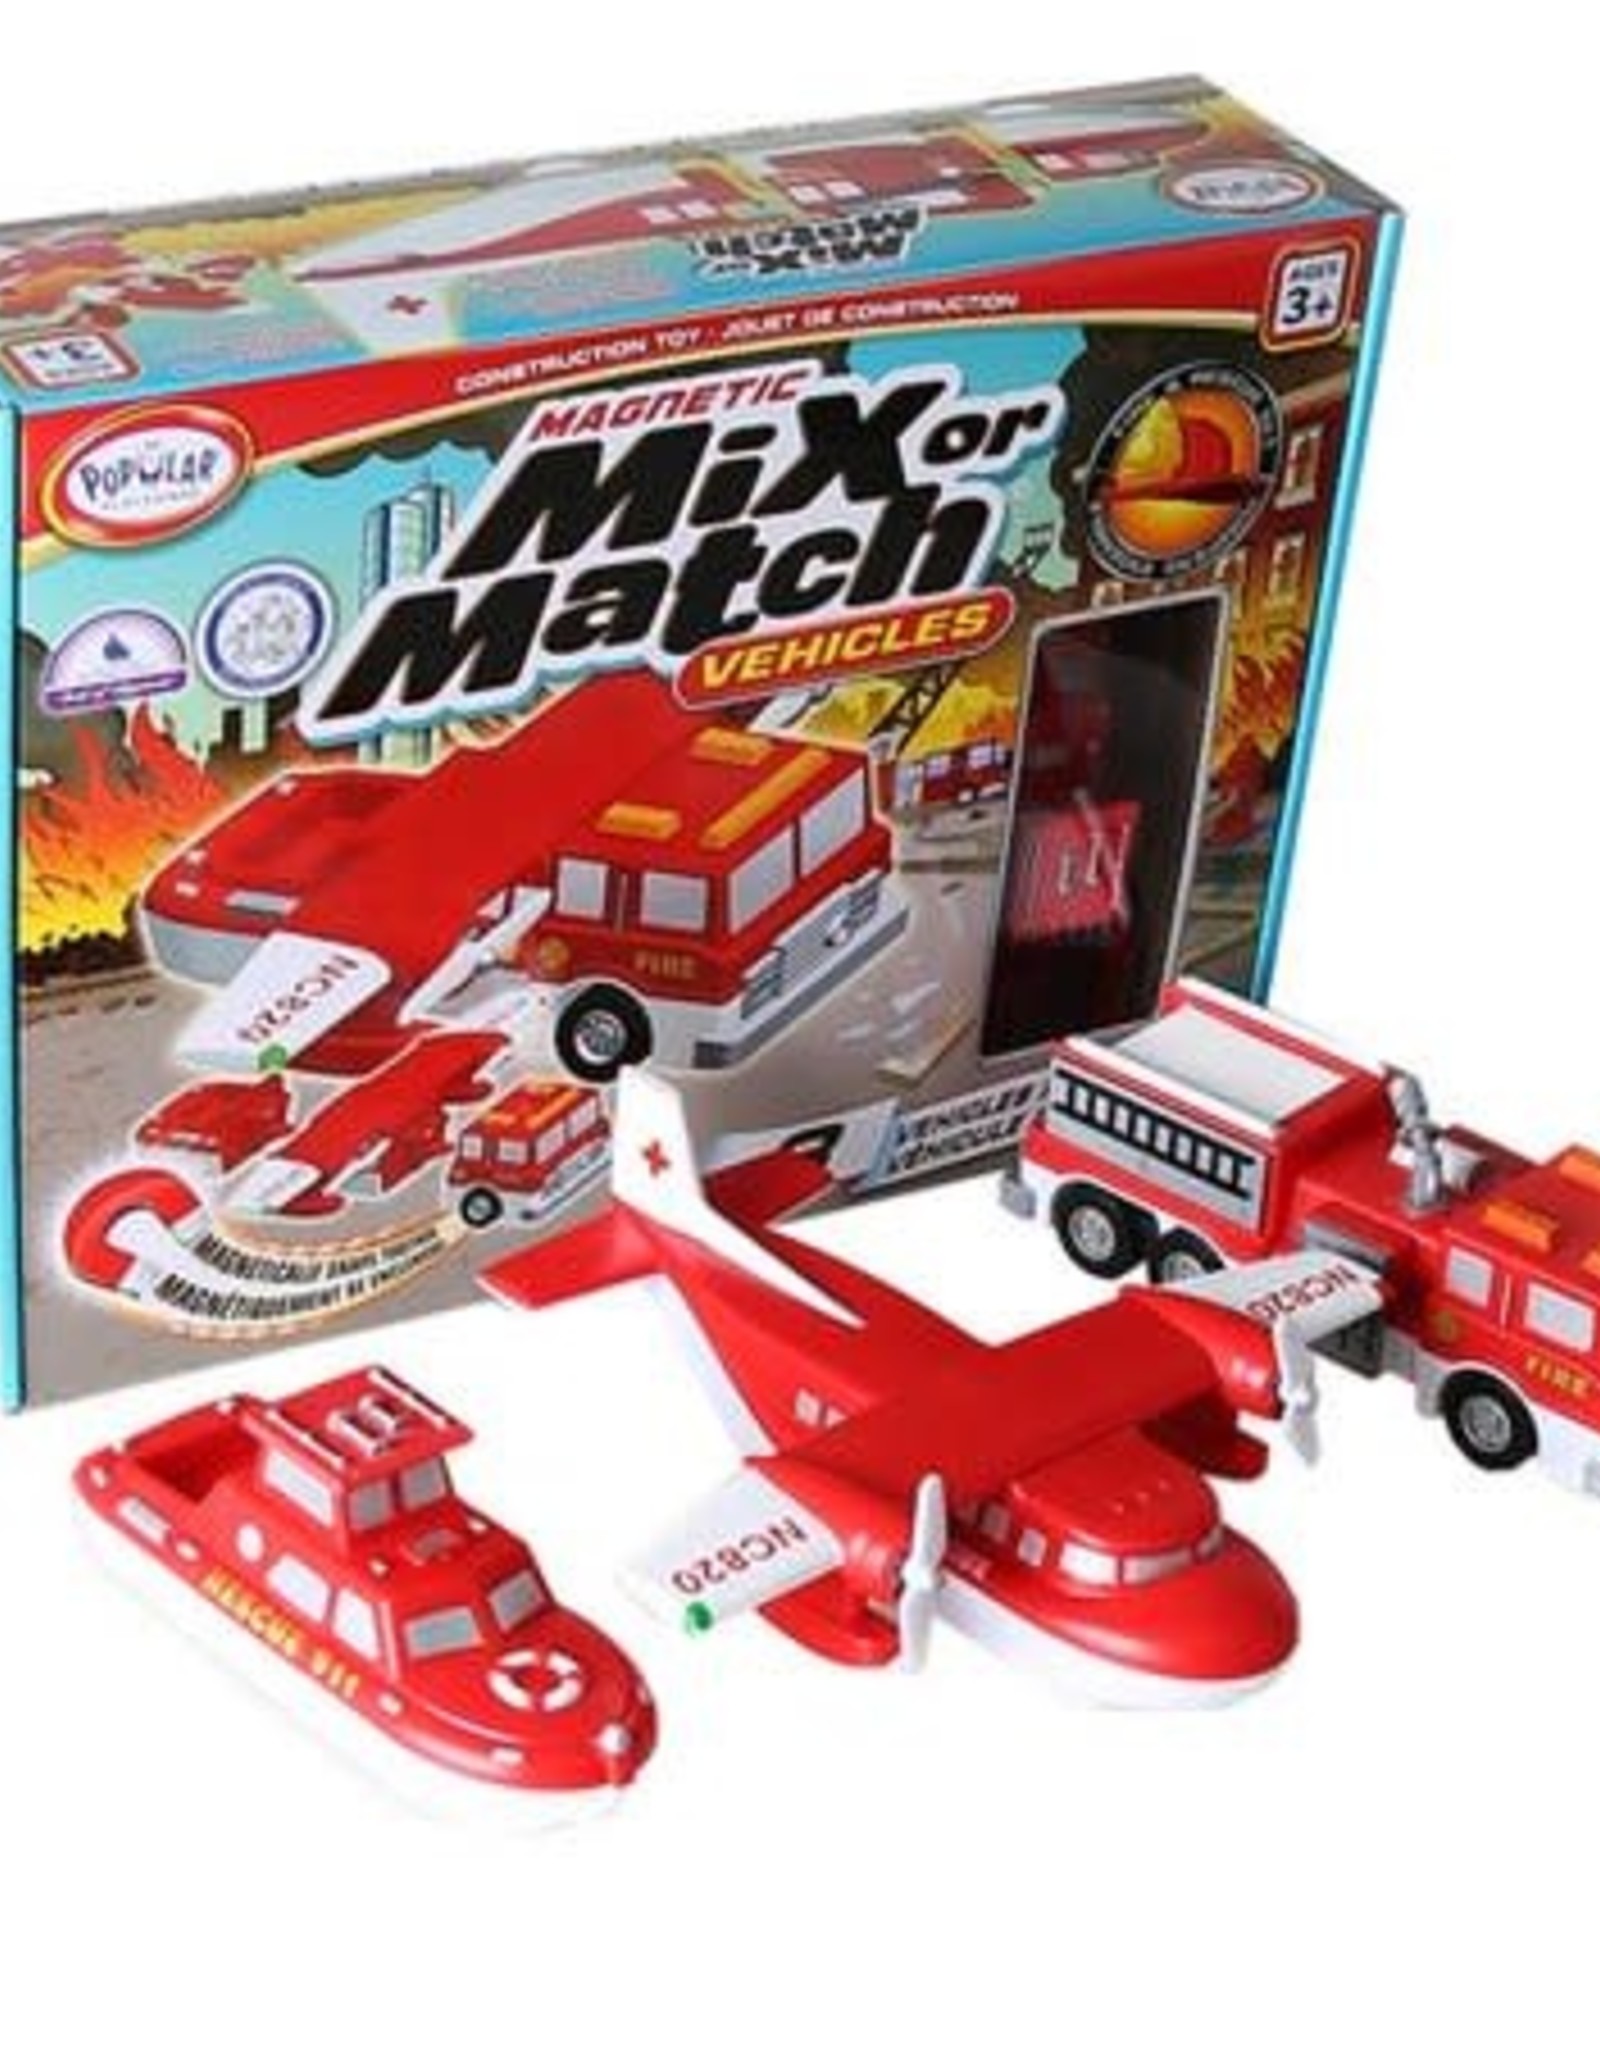 Popular Playthings Mix or Match Vehicles Fire and Rescue